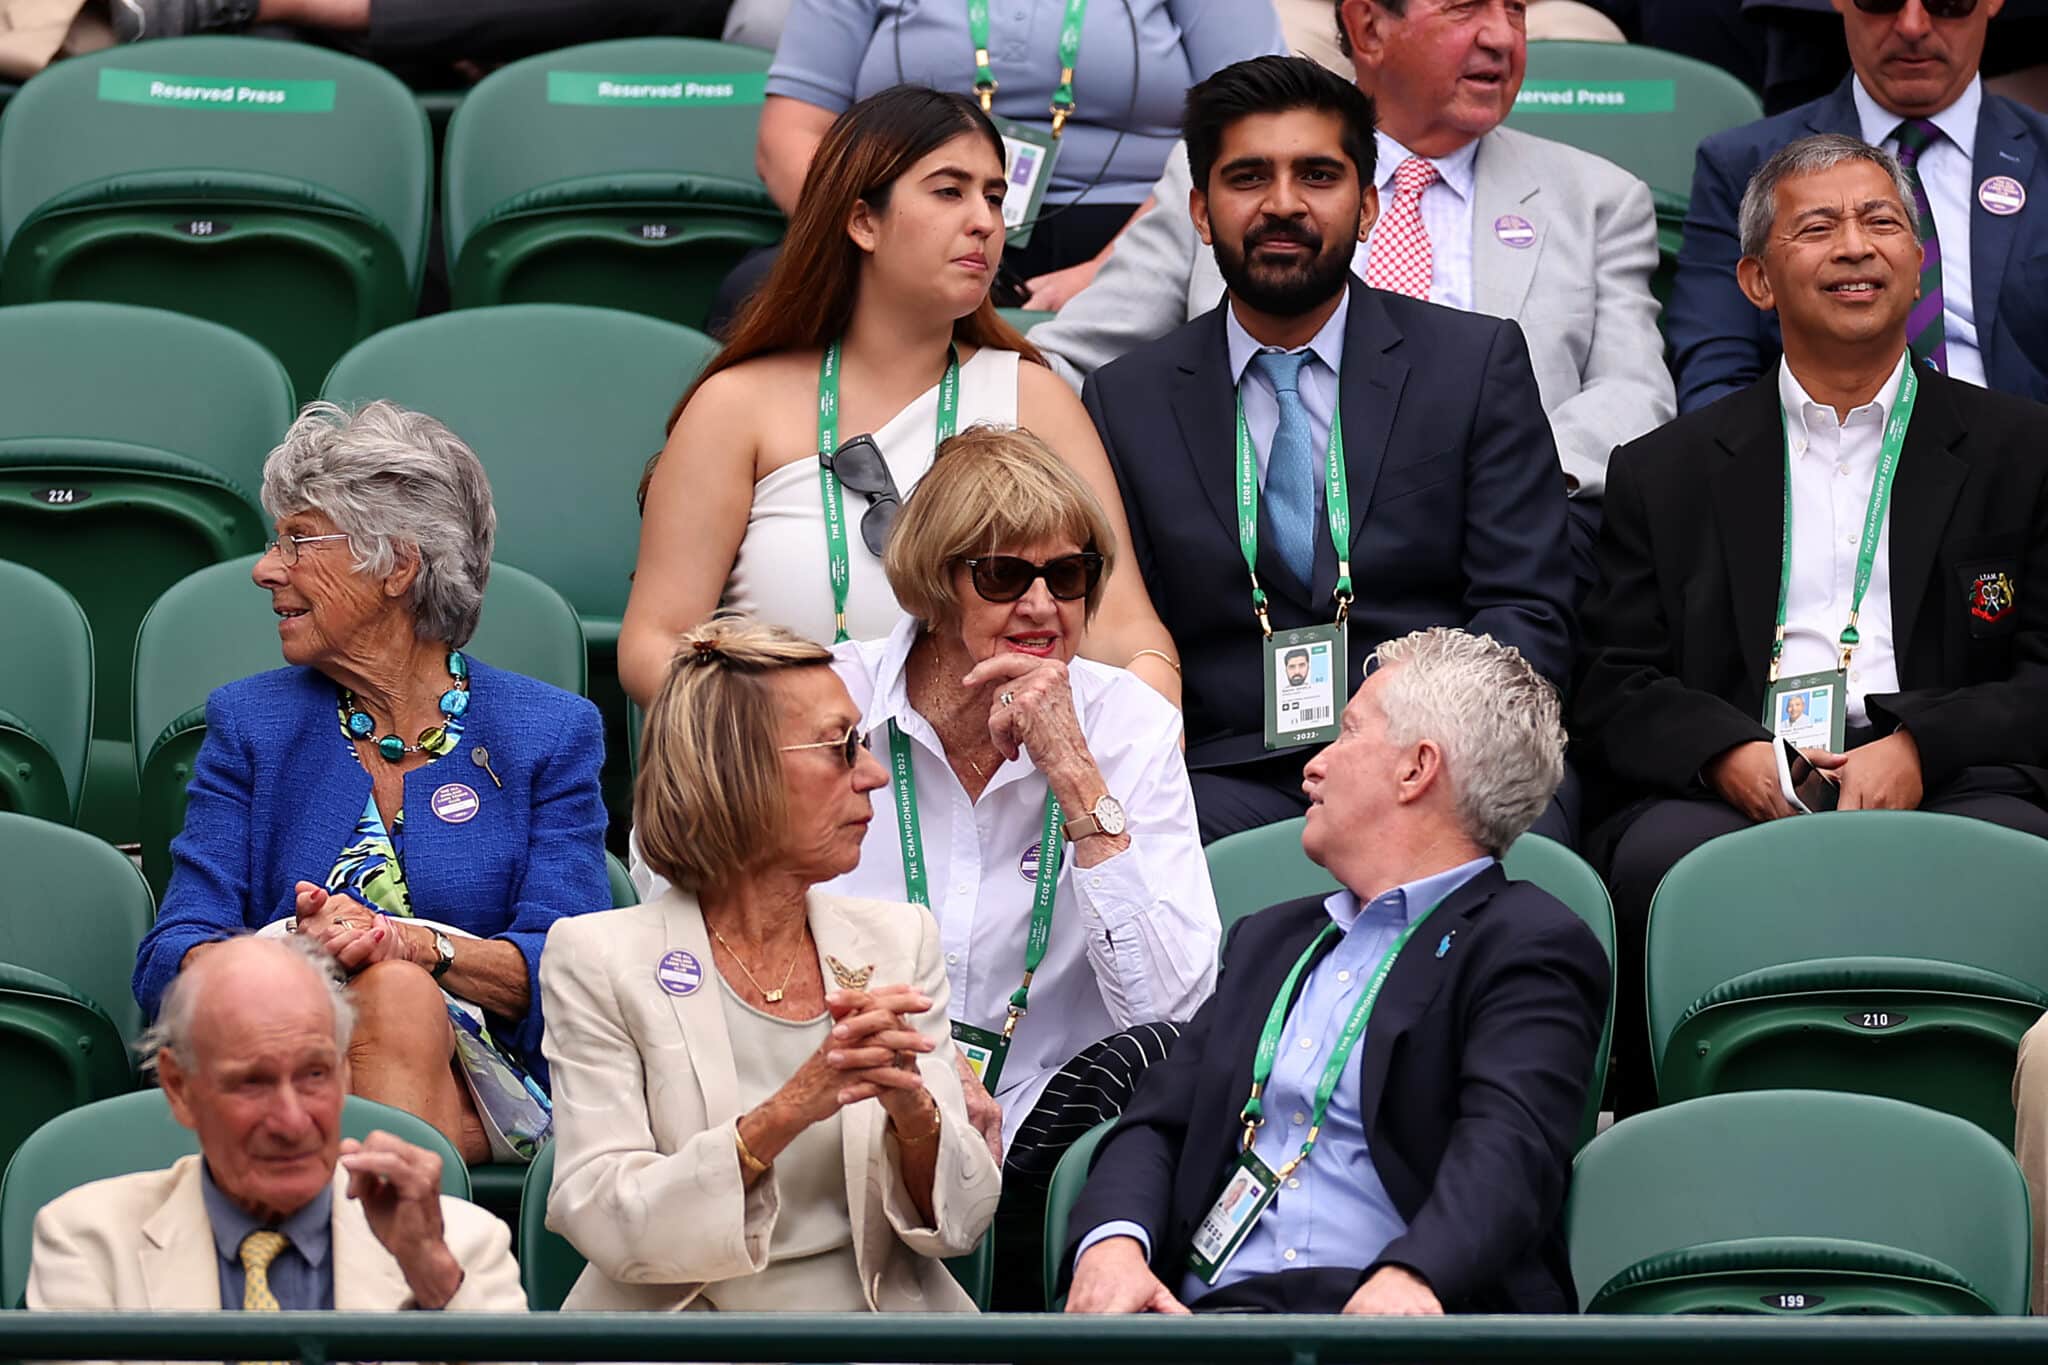 Craig Tiley, CEO of Tennis Australia talks with Margaret Court as they watch the match between Nick Kyrgios of Australia and Cristian Garin of Chile during their Men's Singles Quarter Final match. 